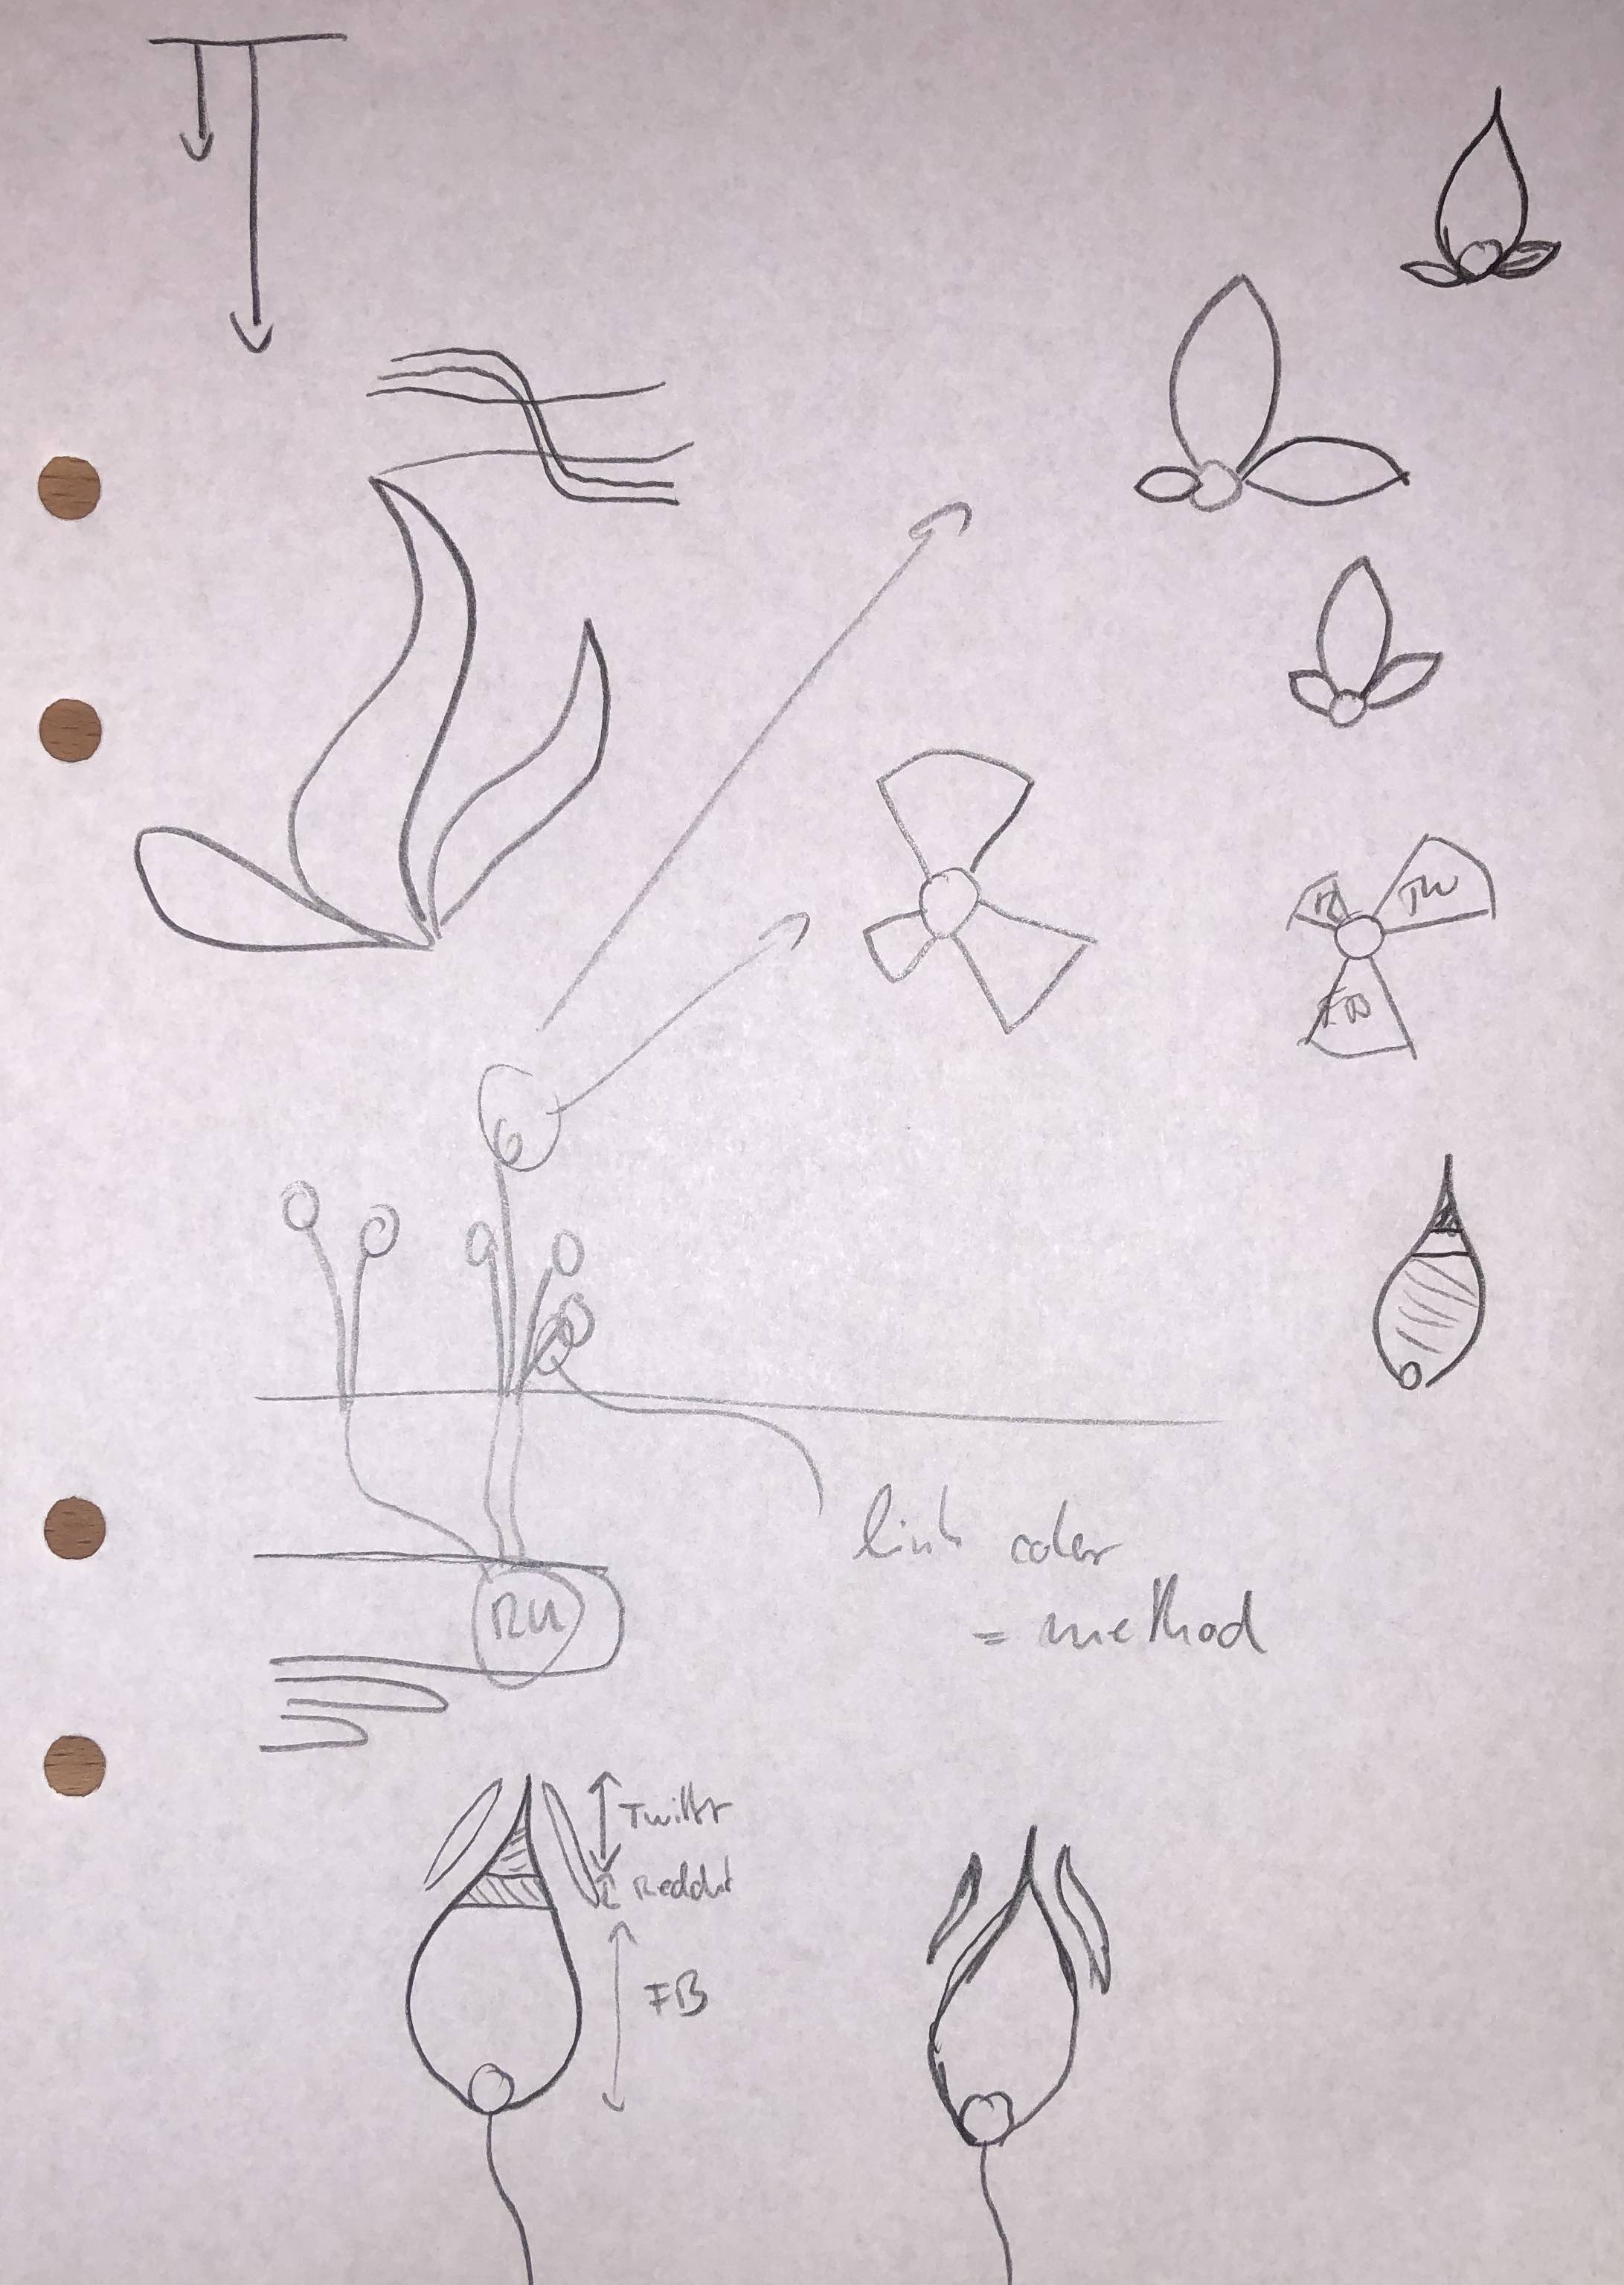 Multiple wild sketches of flames and flowers.